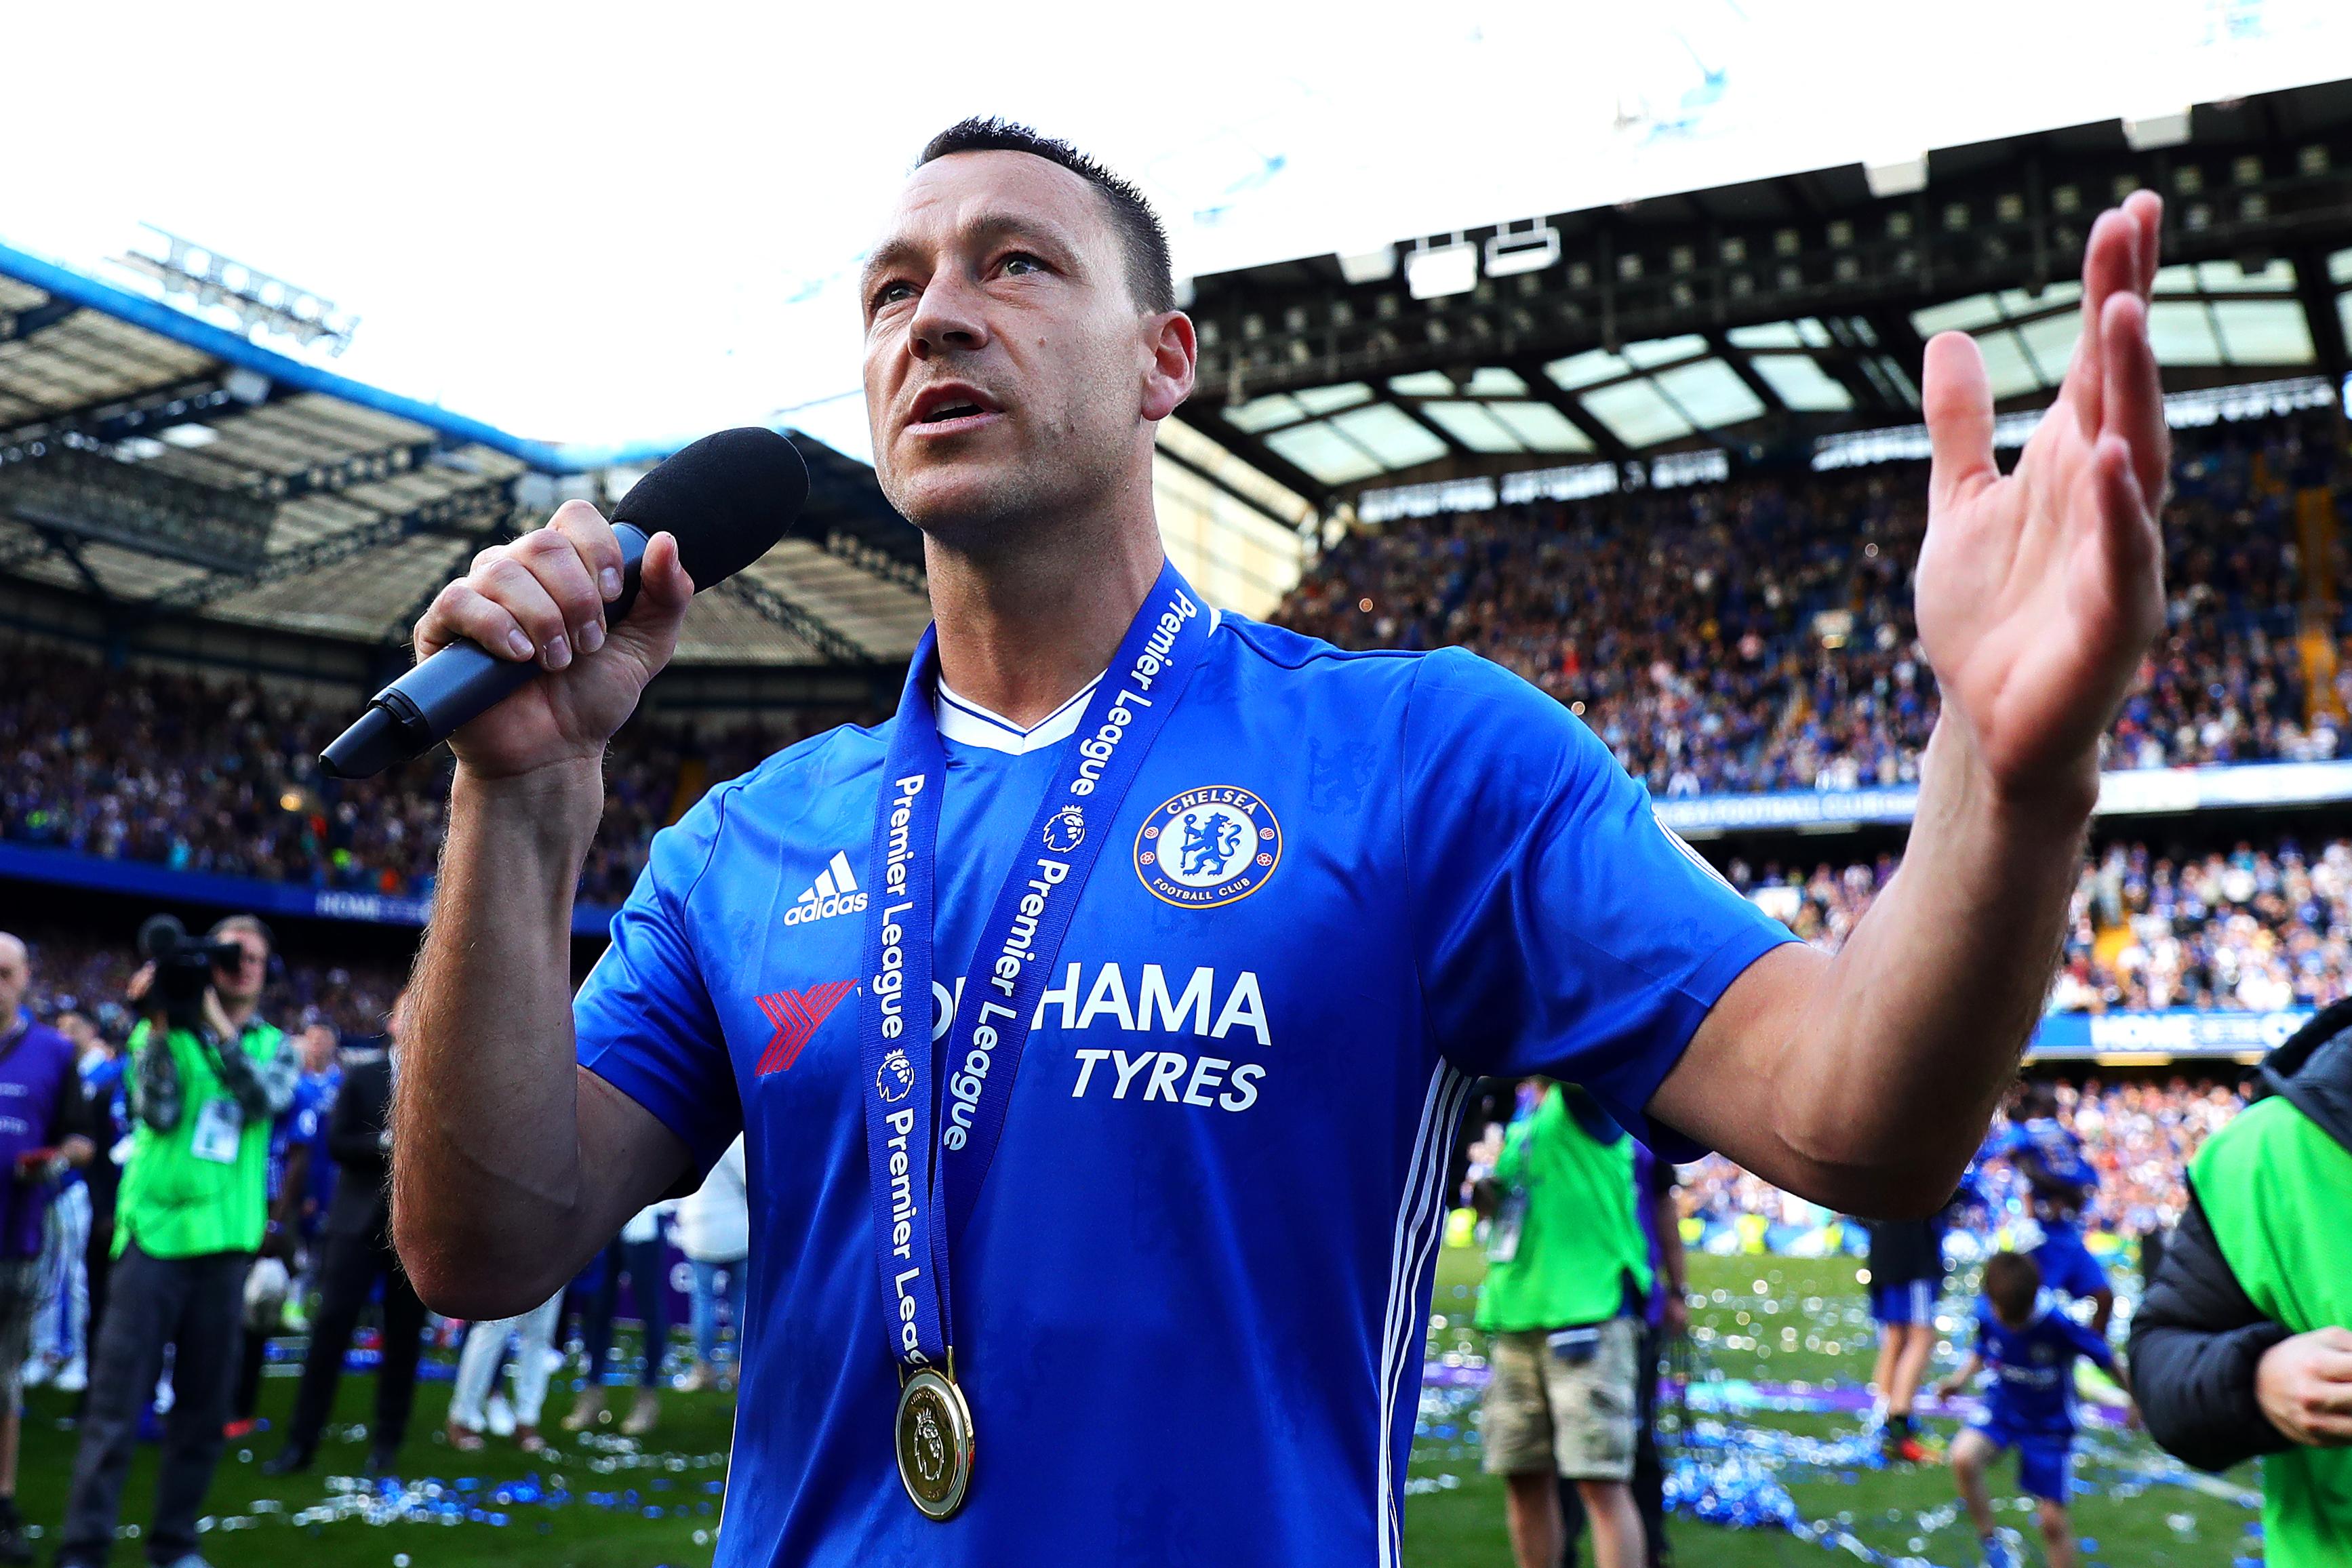 LONDON, ENGLAND - MAY 21: John Terry of Chelsea addresses Roman Abramovich from the pitch following the Premier League match between Chelsea and Sunderland at Stamford Bridge on May 21, 2017 in London, England. (Photo by Chris Brunskill Ltd/Getty Images)